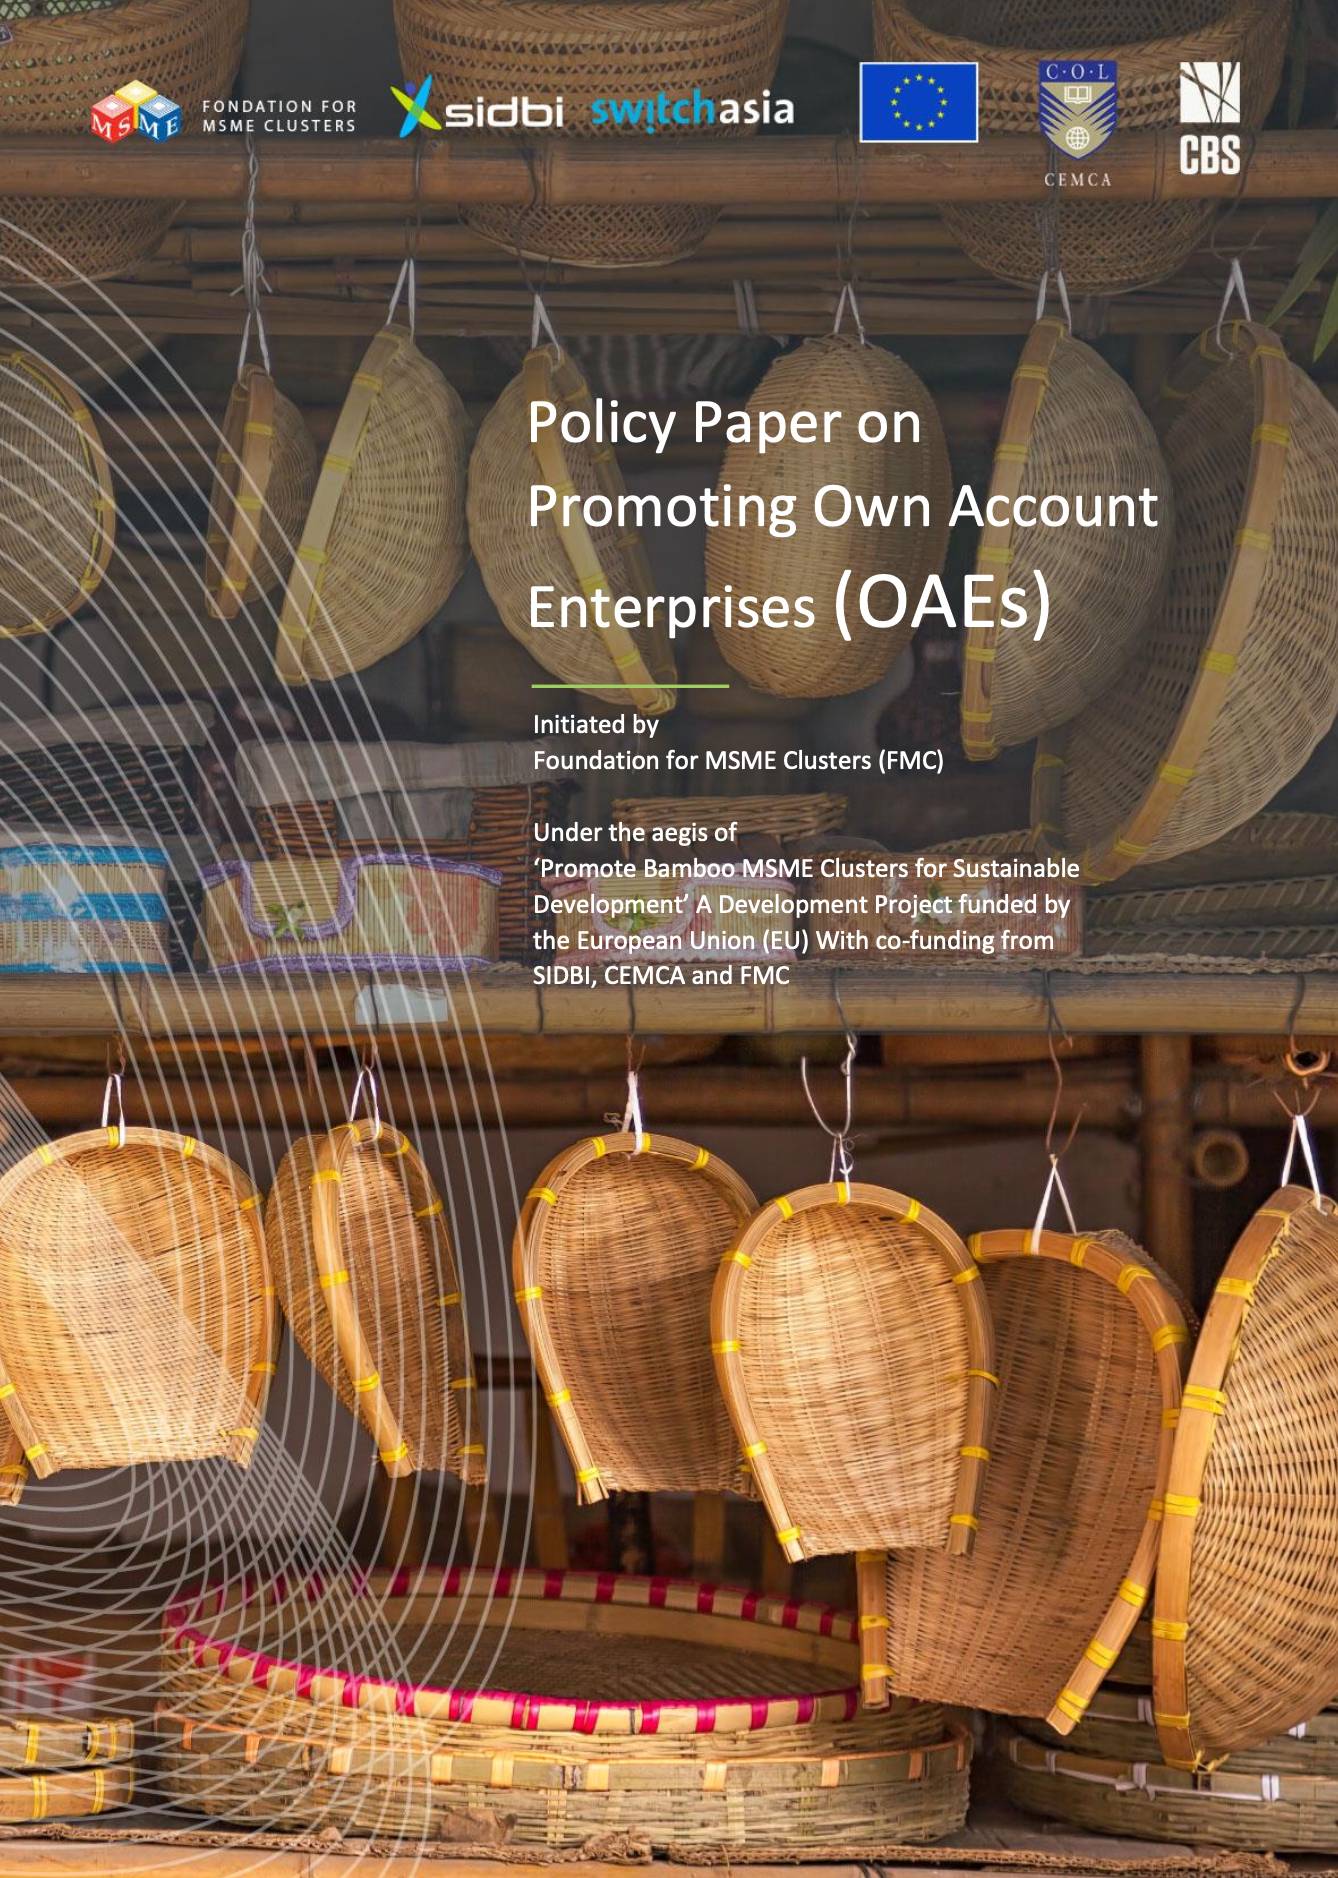 Policy Paper on Promoting Own Account Enterprises (OAEs)